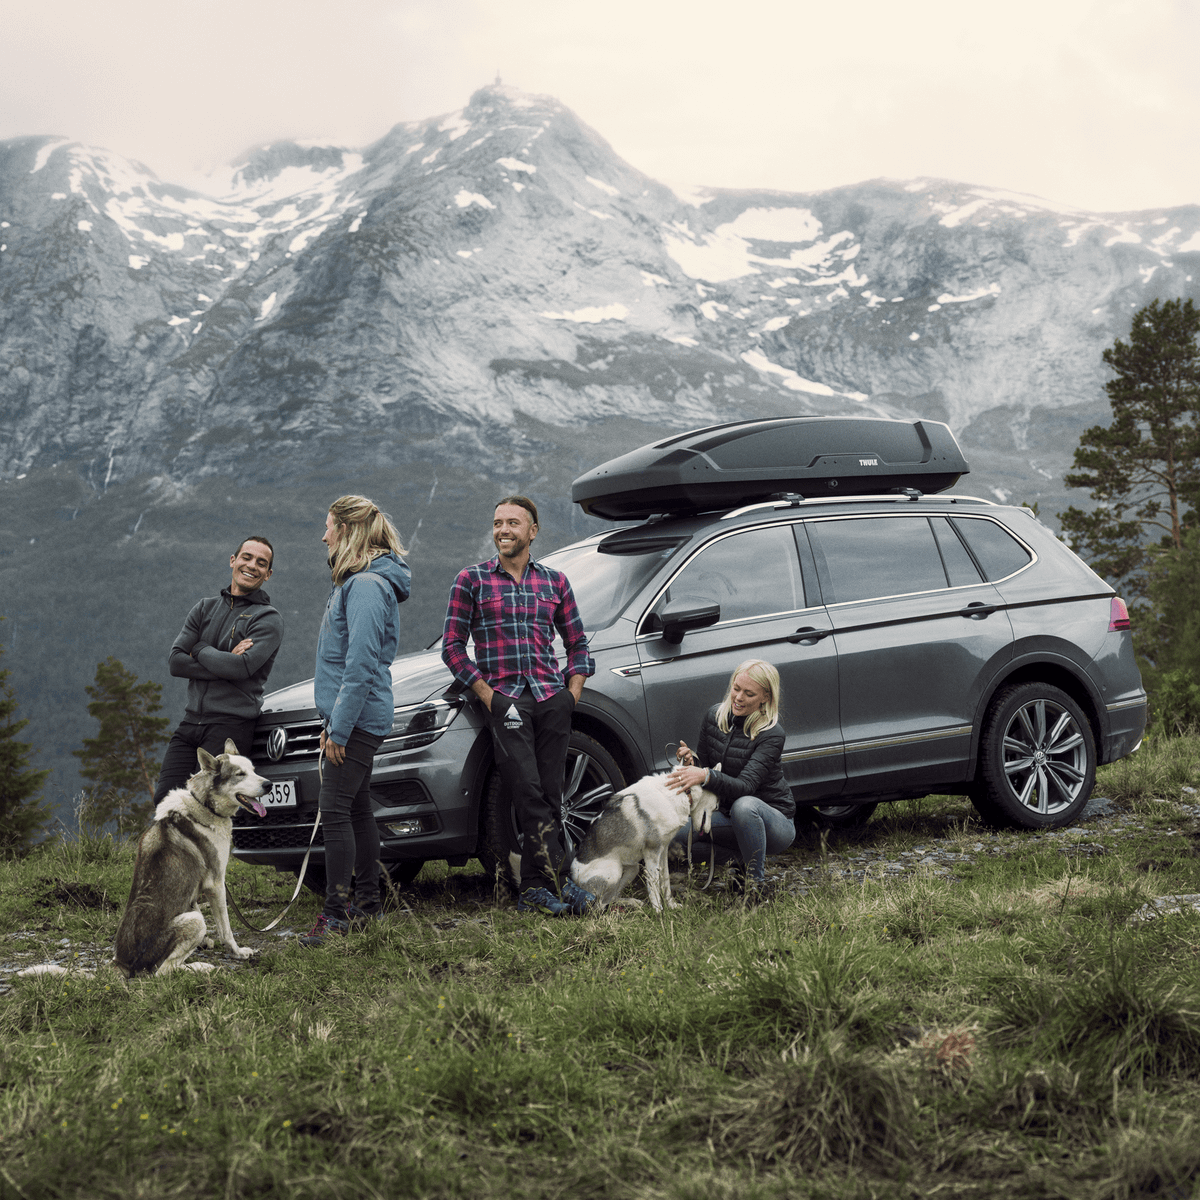 A group of people stands in front of a car with a roof box parked outdoors by a scenic mountain